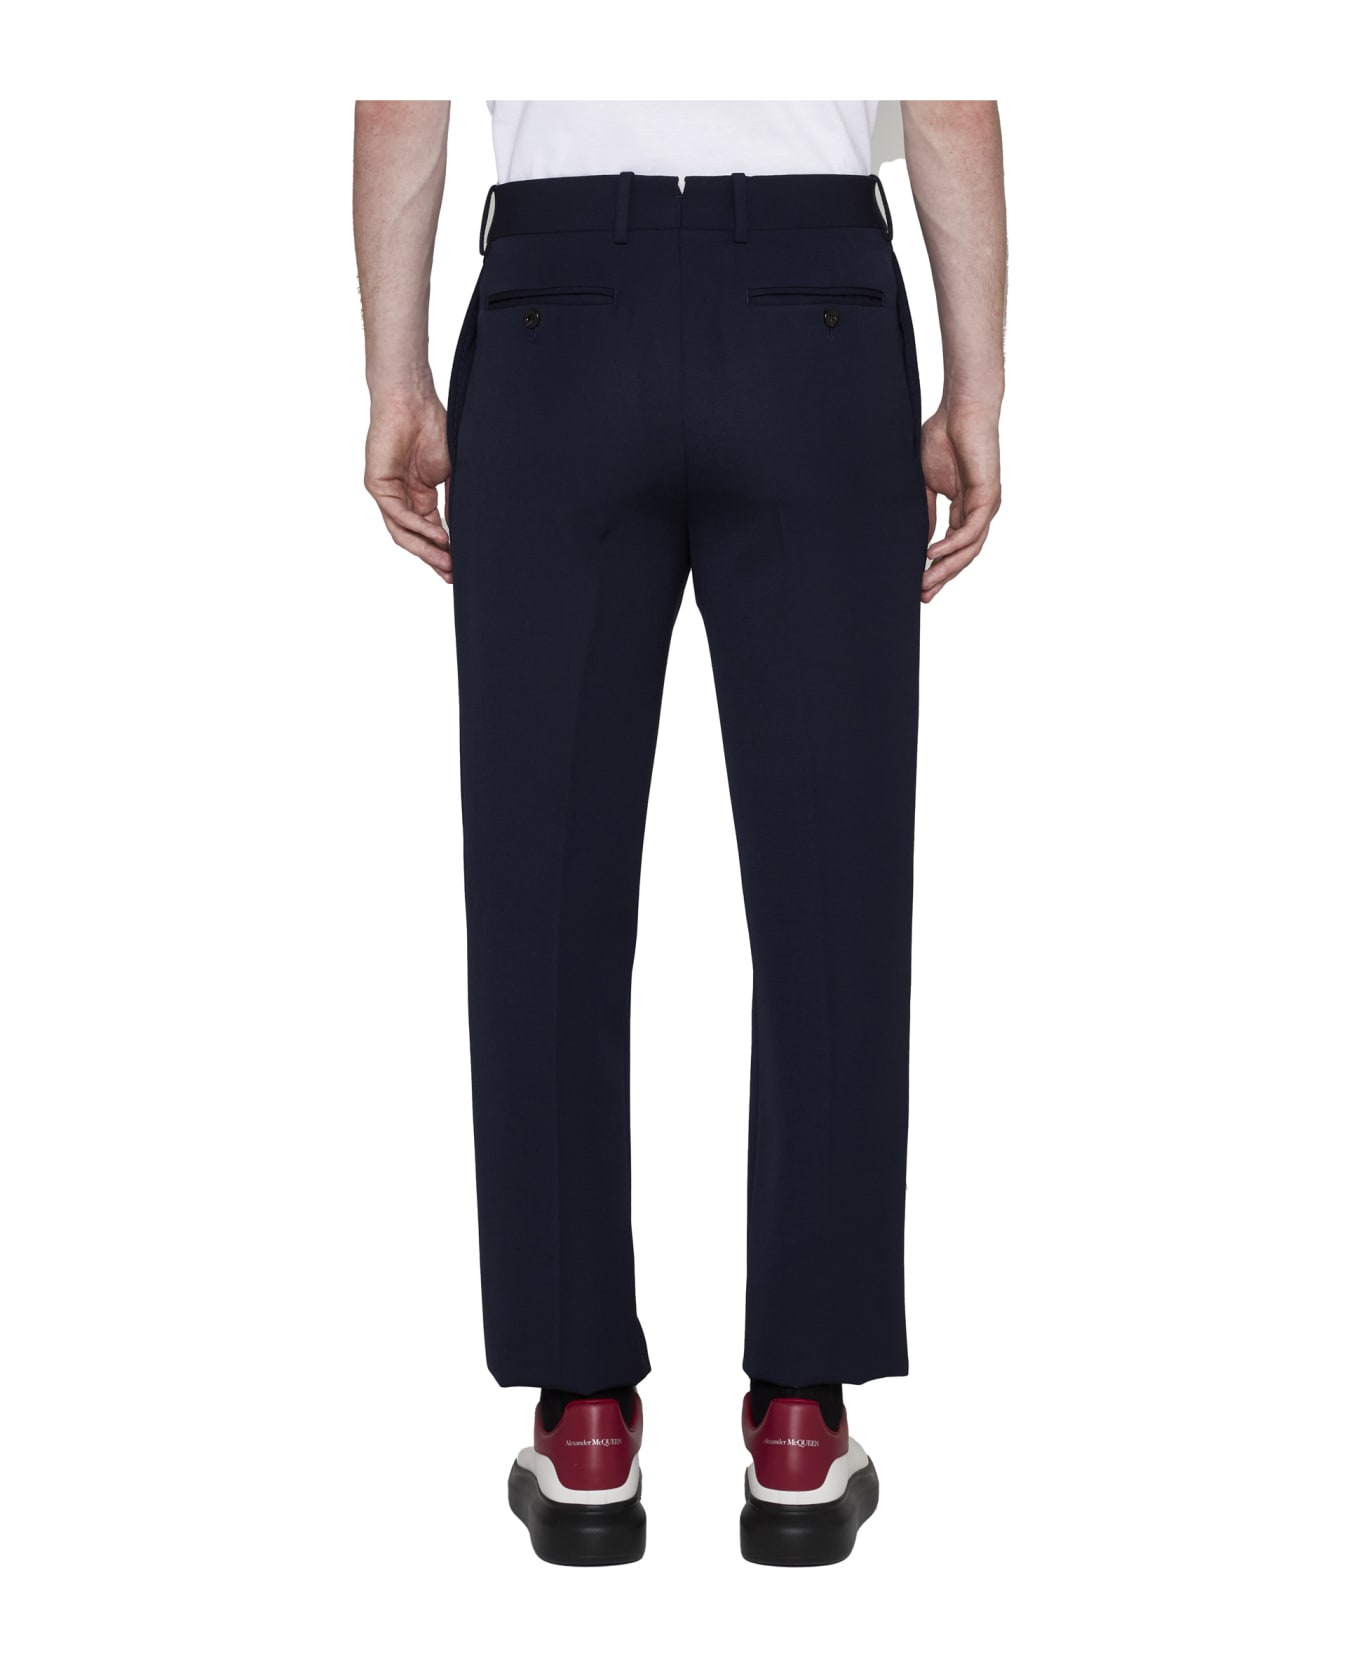 Alexander McQueen Tailored Cigarette Pants - Bright navy ボトムス